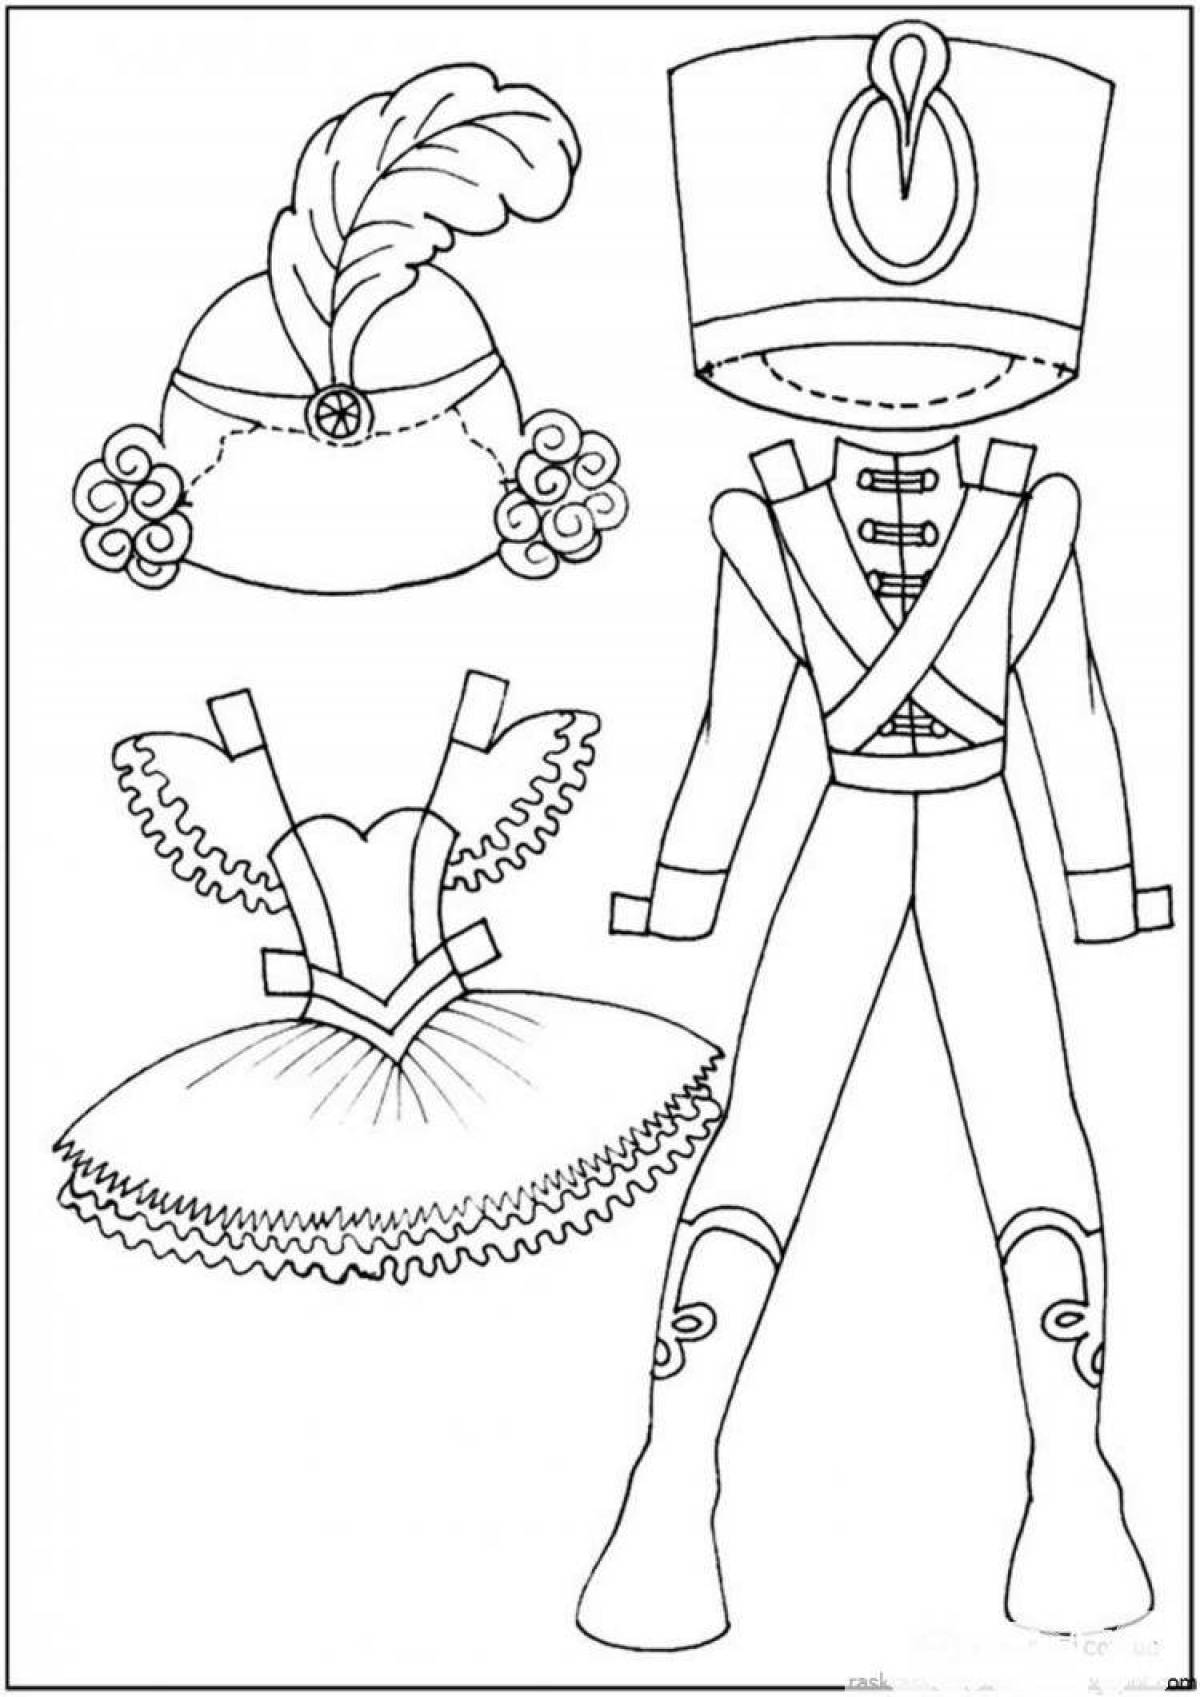 Great hussar coloring page